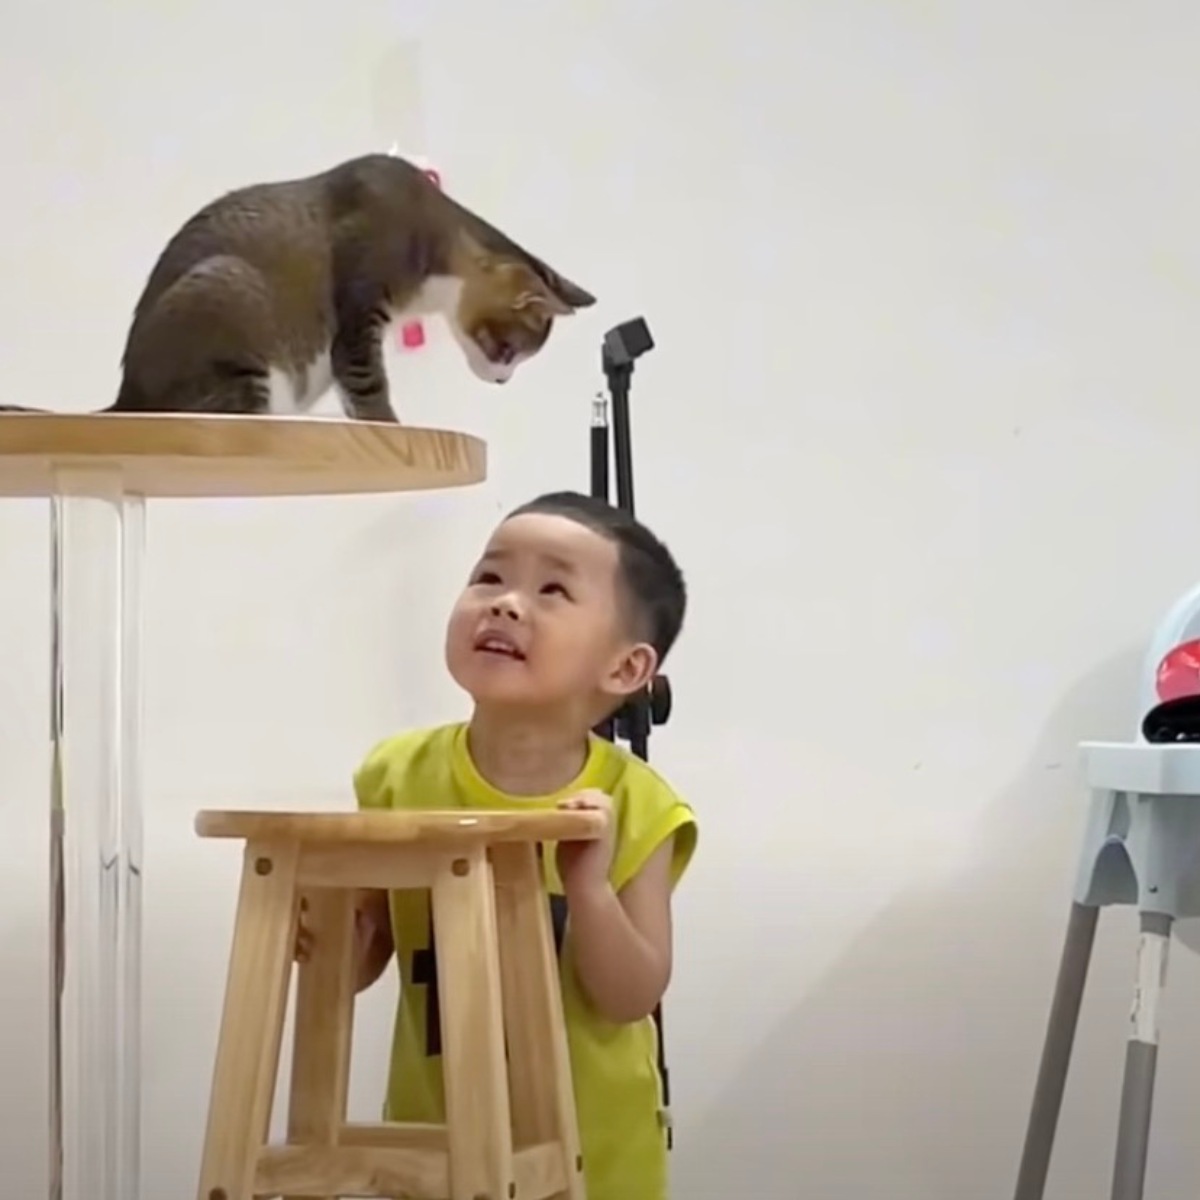 cat sitting on table looking down on boy